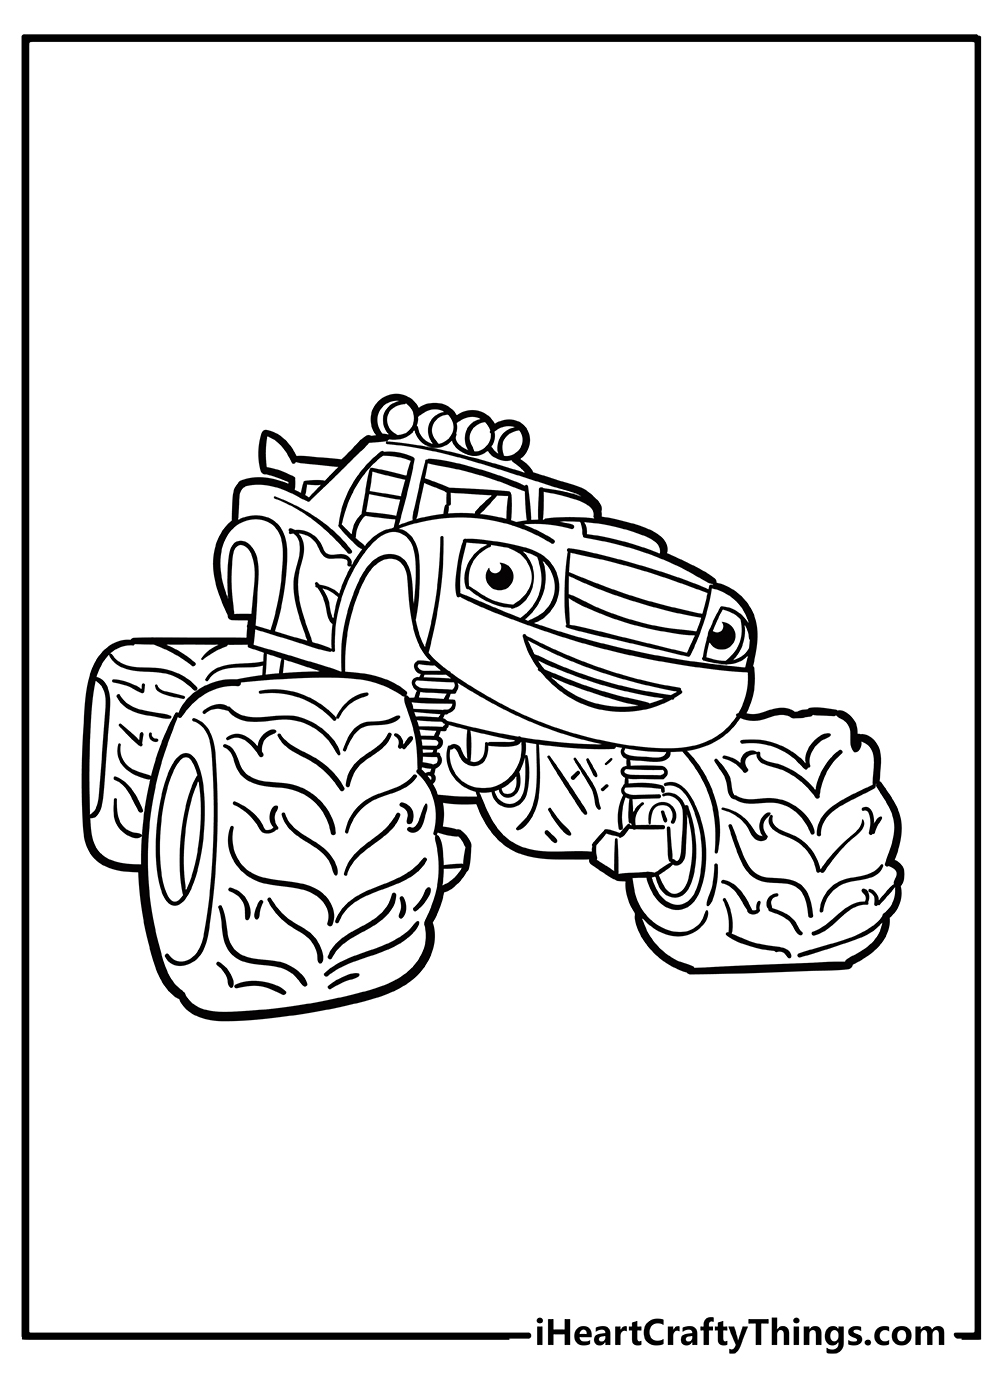 Blaze Coloring Pages 100 Free Printables 